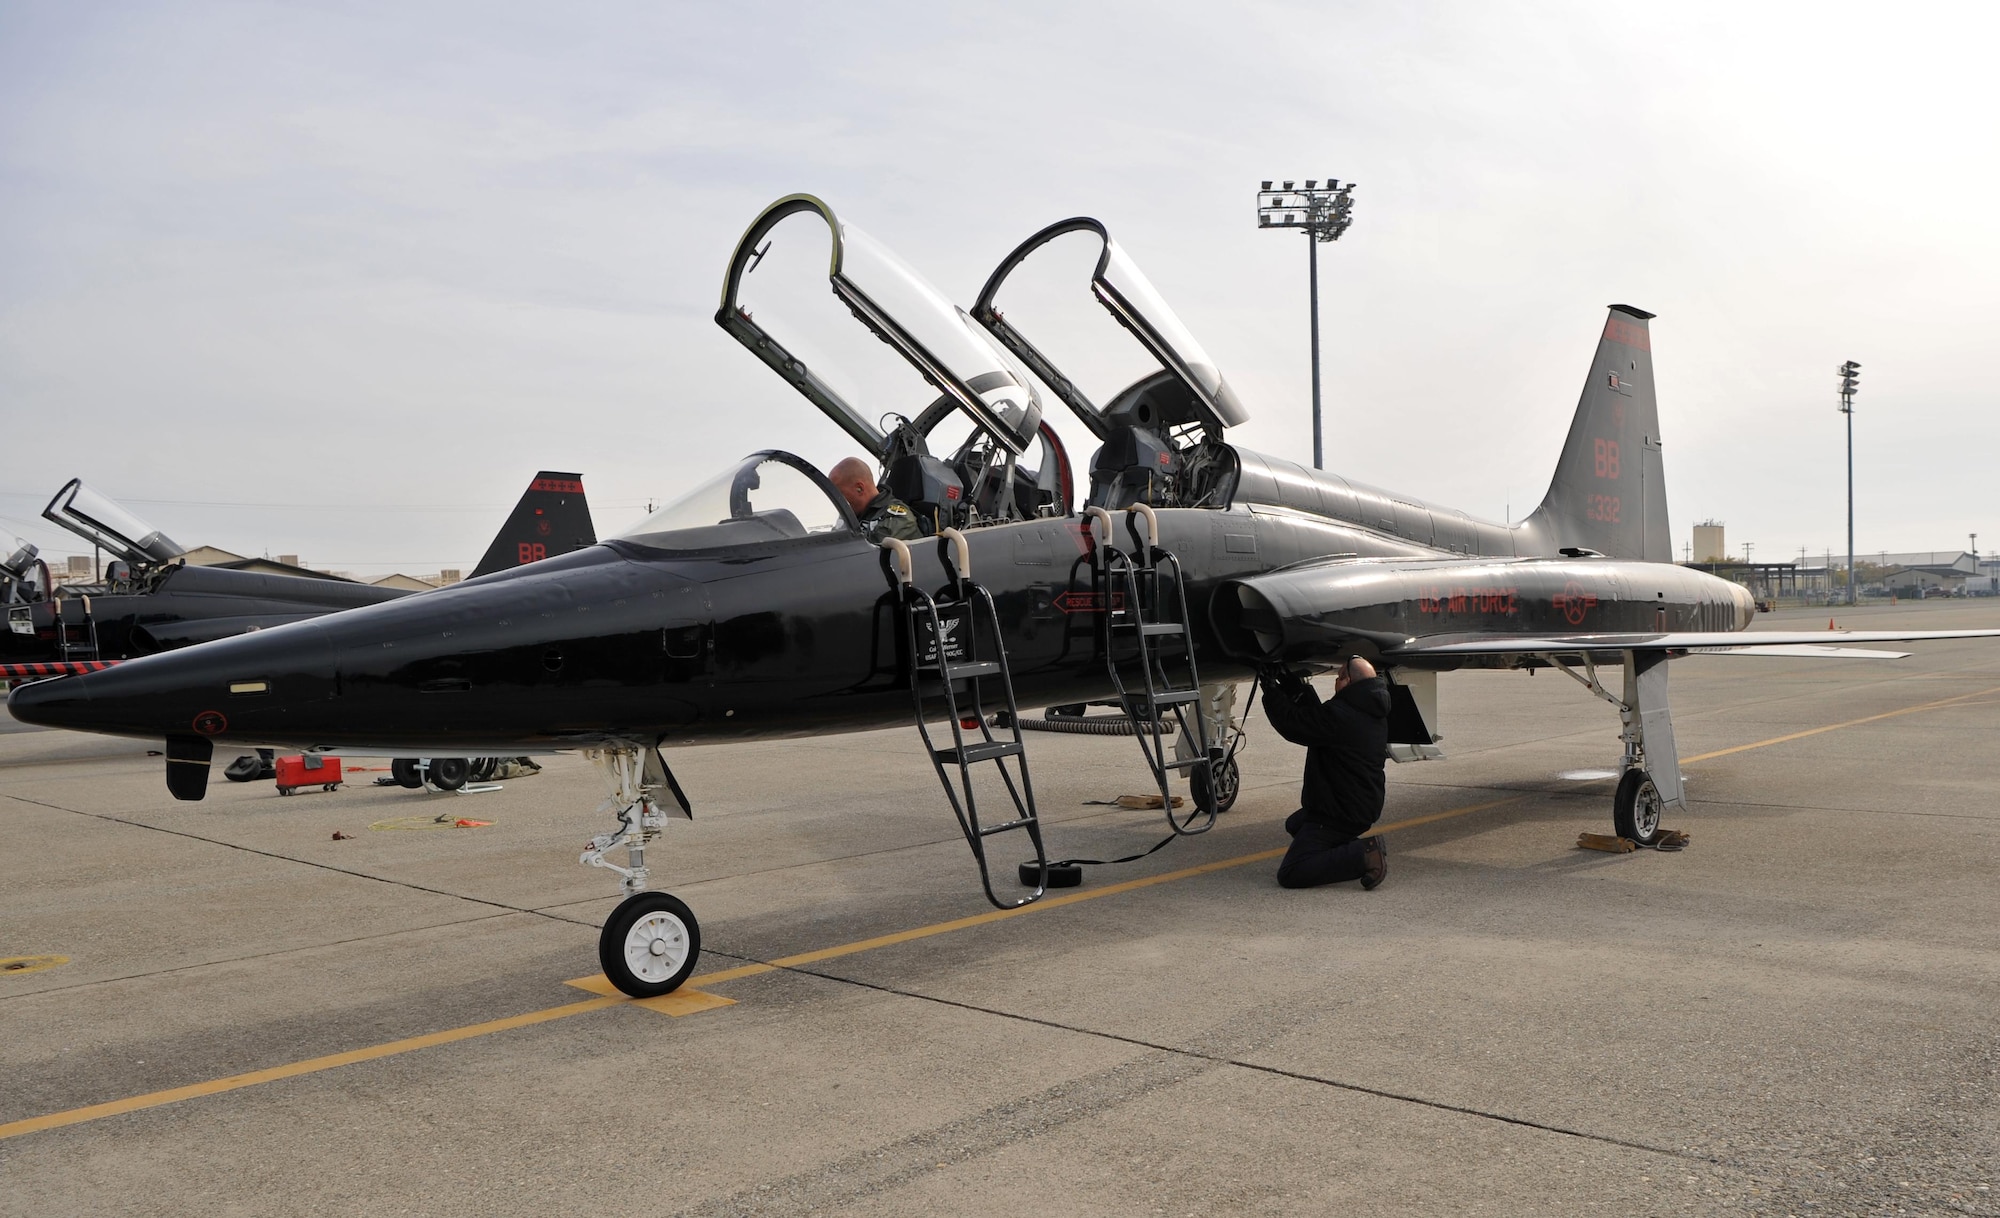 Matt Miller, 9th Maintenance Group T-38 aircraft mechanic, begins inspecting a T-38 Talon after a sortie Dec. 5, 2016, at Beale Air Force Base, California. The mechanics’ efforts allow pilots to fly between 12 and 15 sorties a day. (U.S. Air Force Photo/Airman Tristan D. Viglianco)